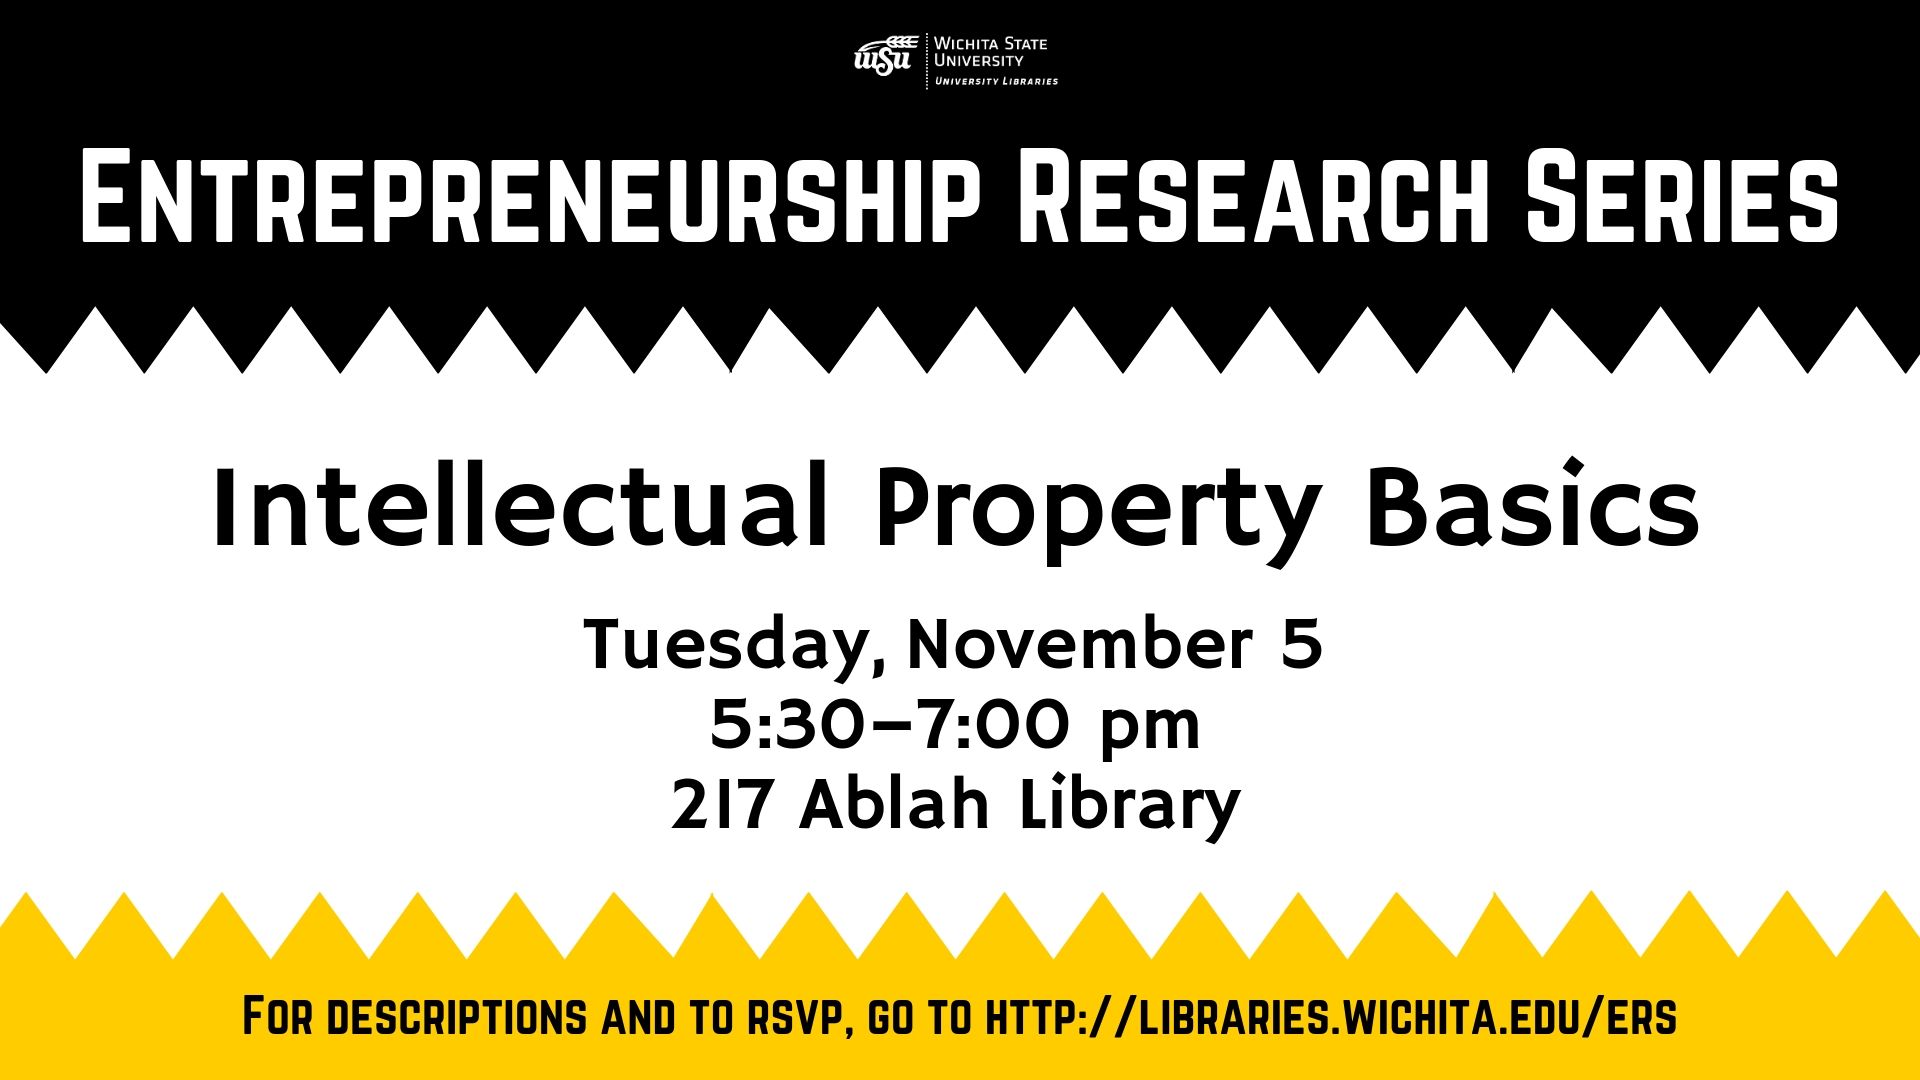 Learn about intellectual property basics in Tuesday workshop at Ablah Library